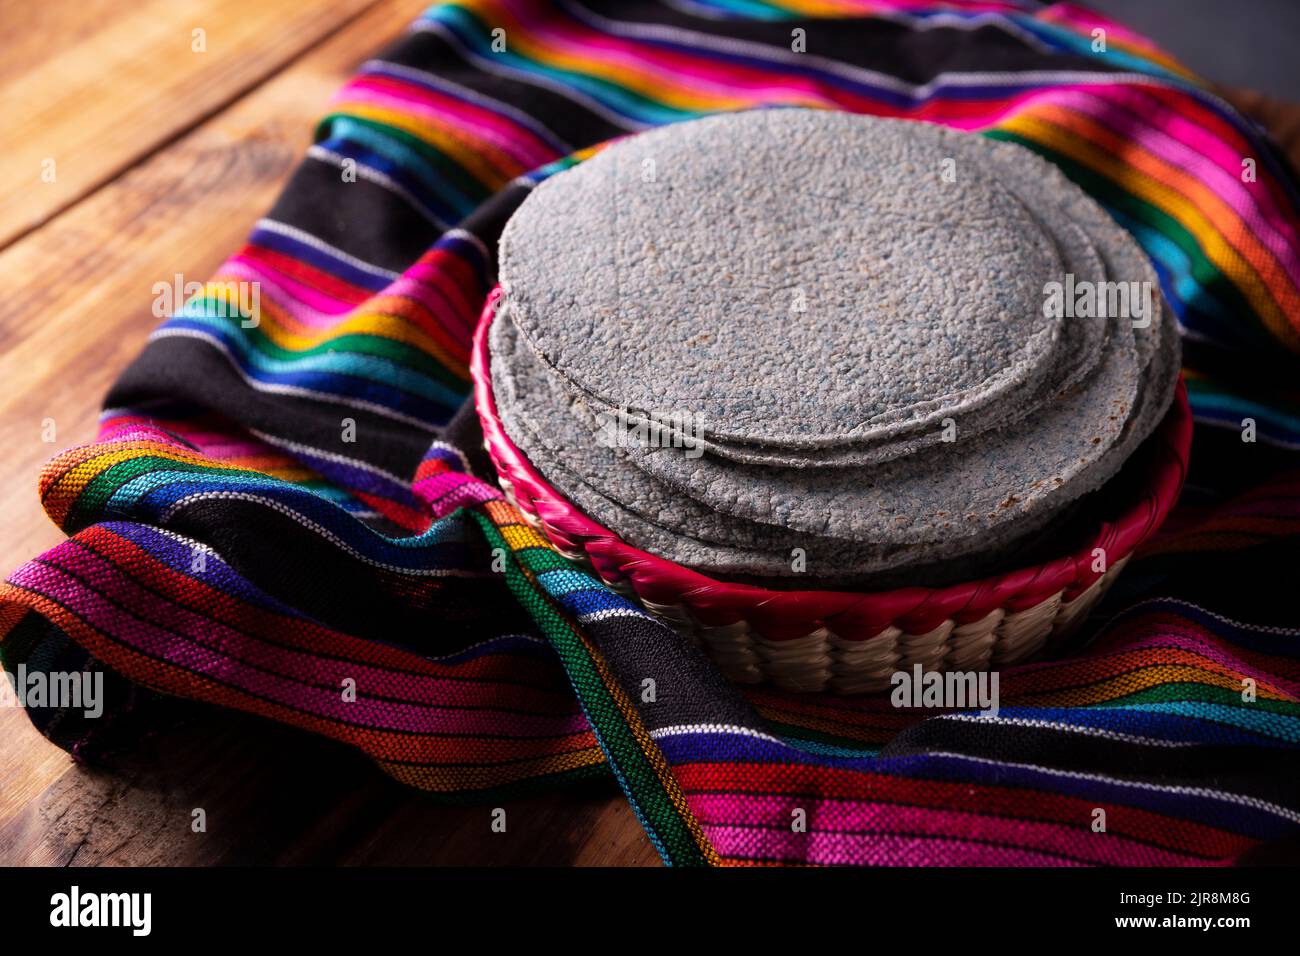 Blue Corn Tortillas. Food made with nixtamalized corn, a staple food in several American countries, an essential element in many Latin American dishes Stock Photo